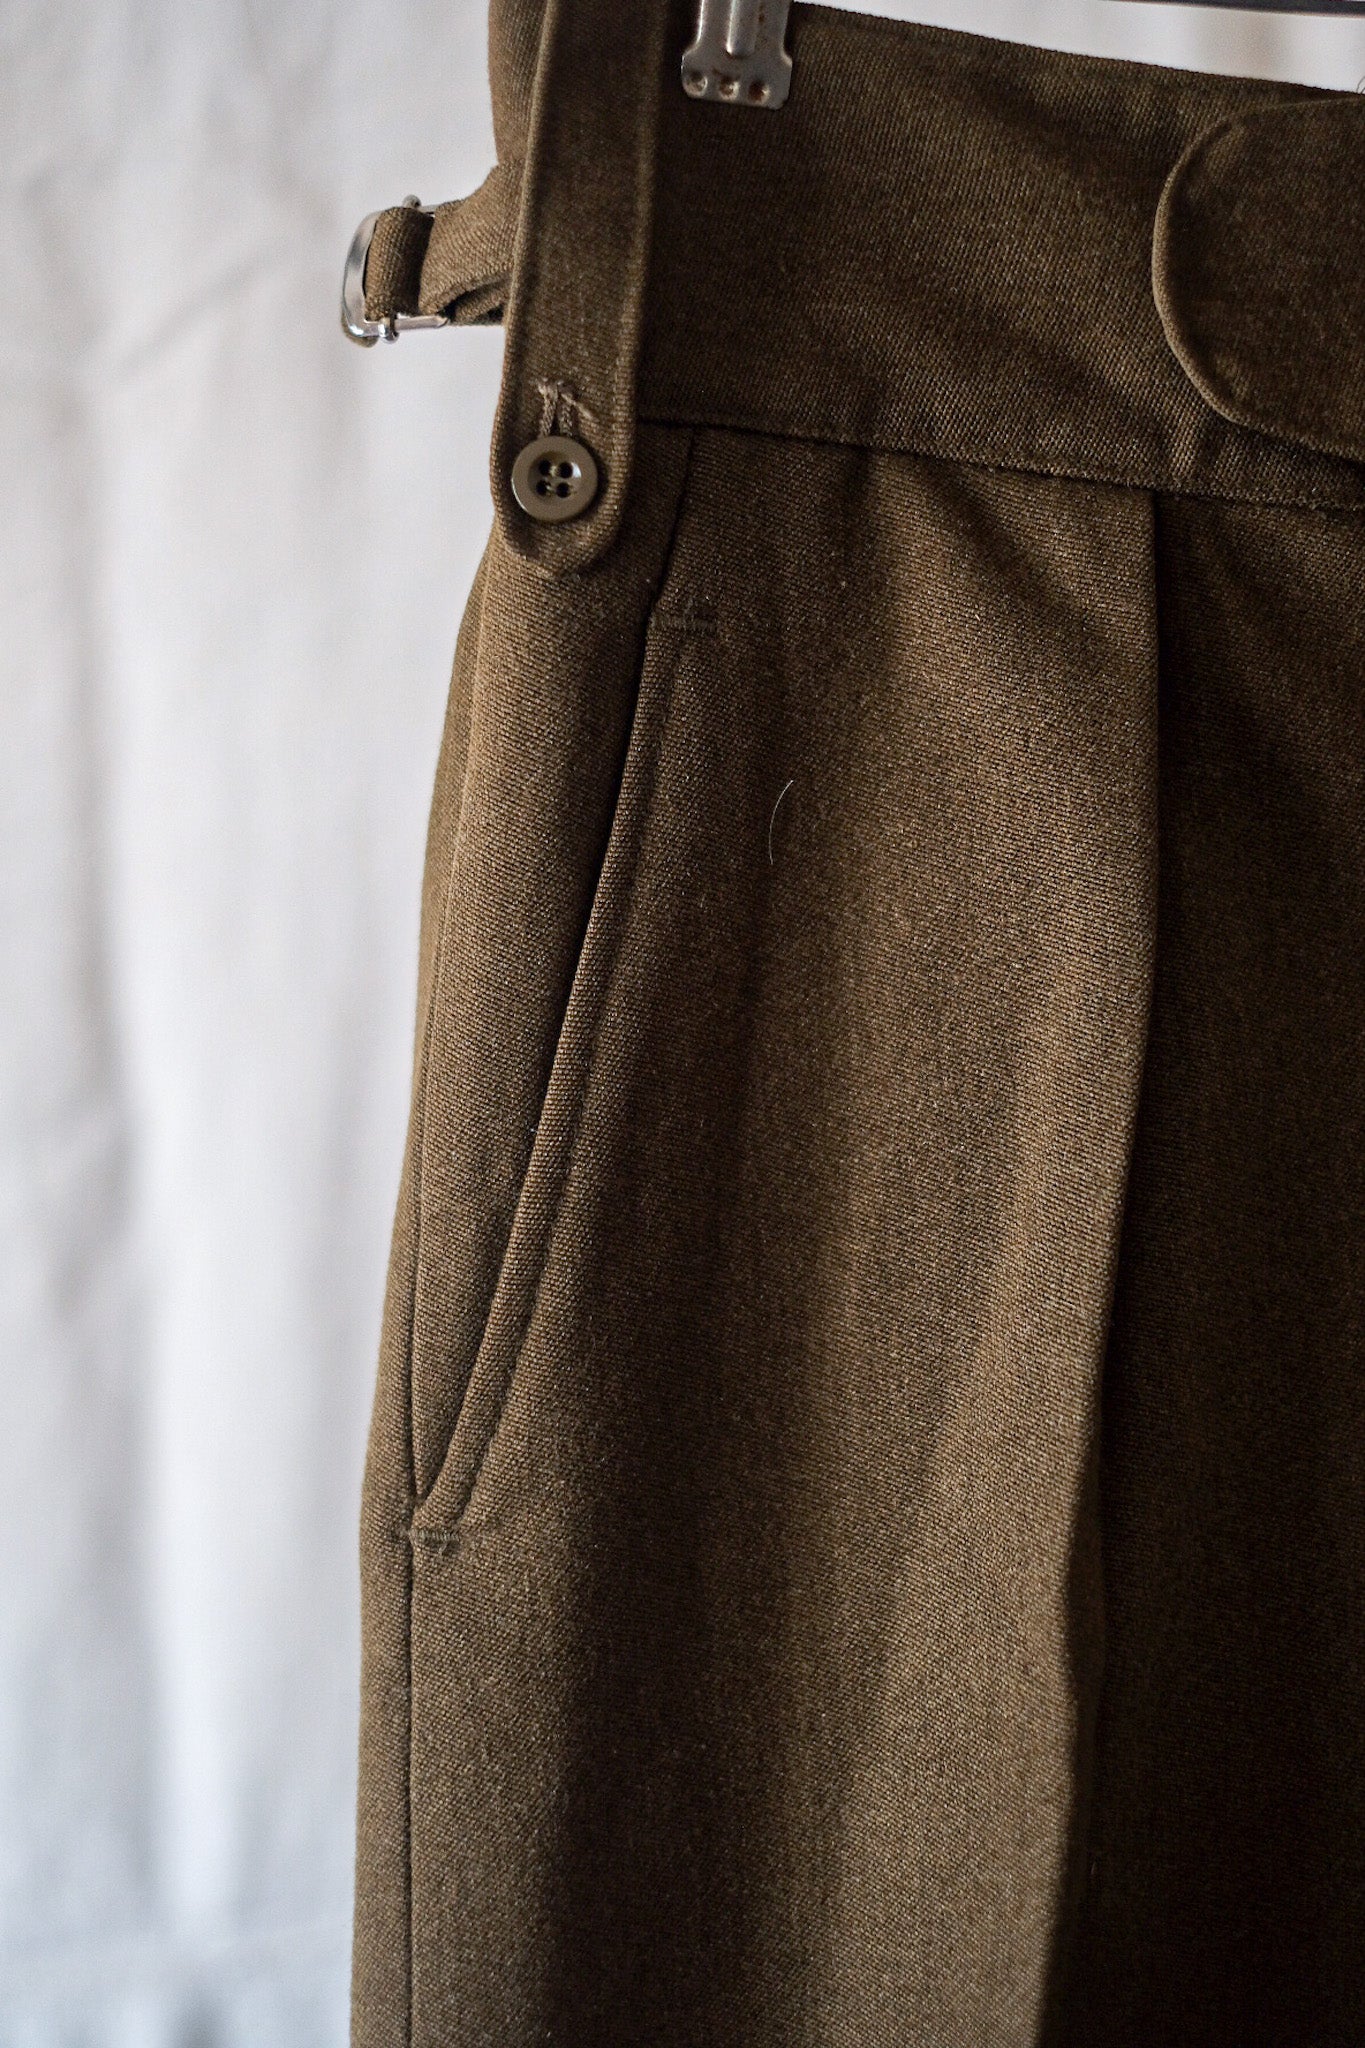 [~ 60's] British Army No.2 Dress Trousers